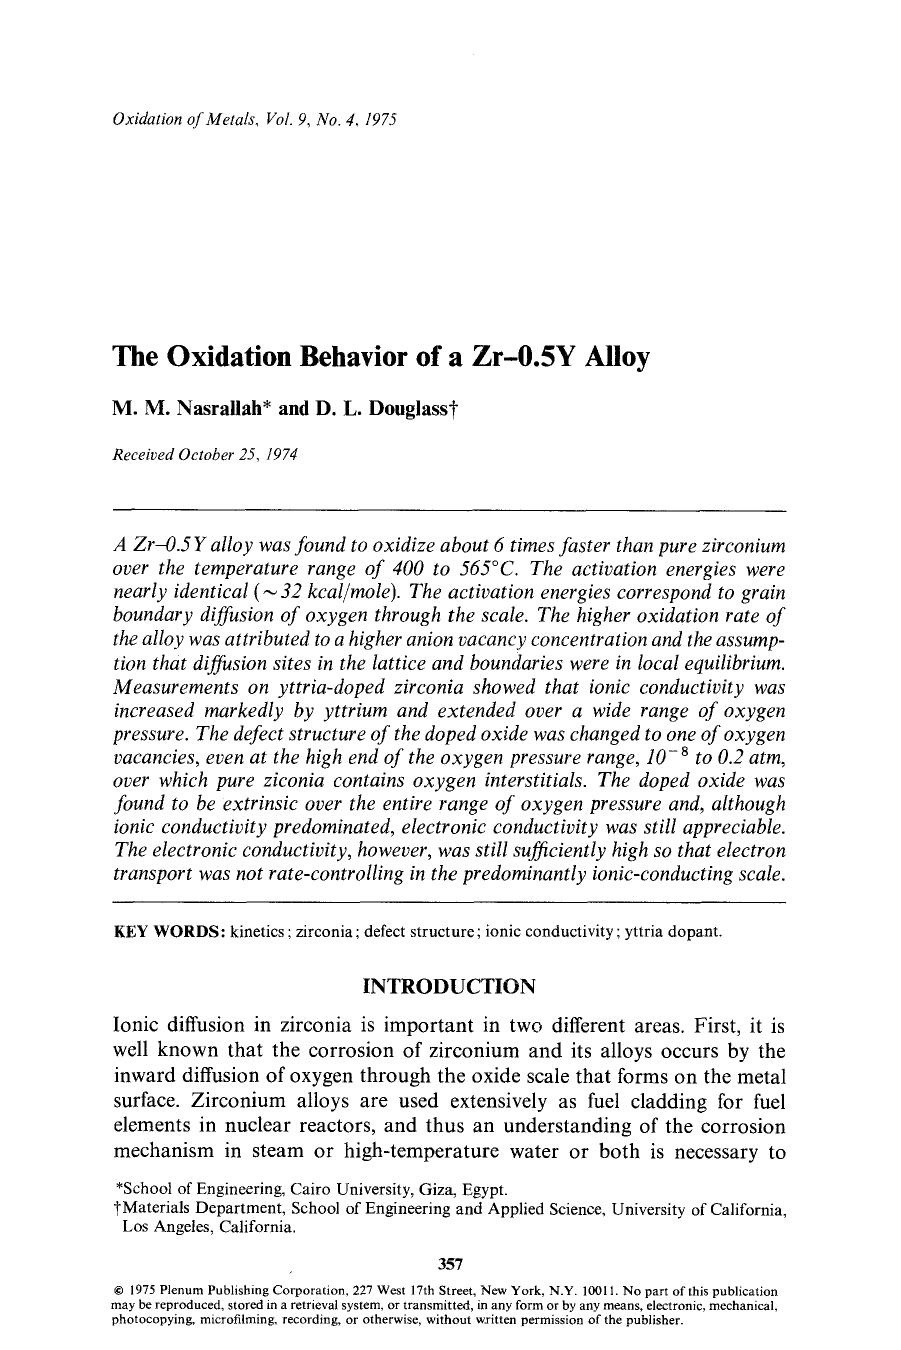 The oxidation behavior of a Zr-0.5Y alloy by Unknown